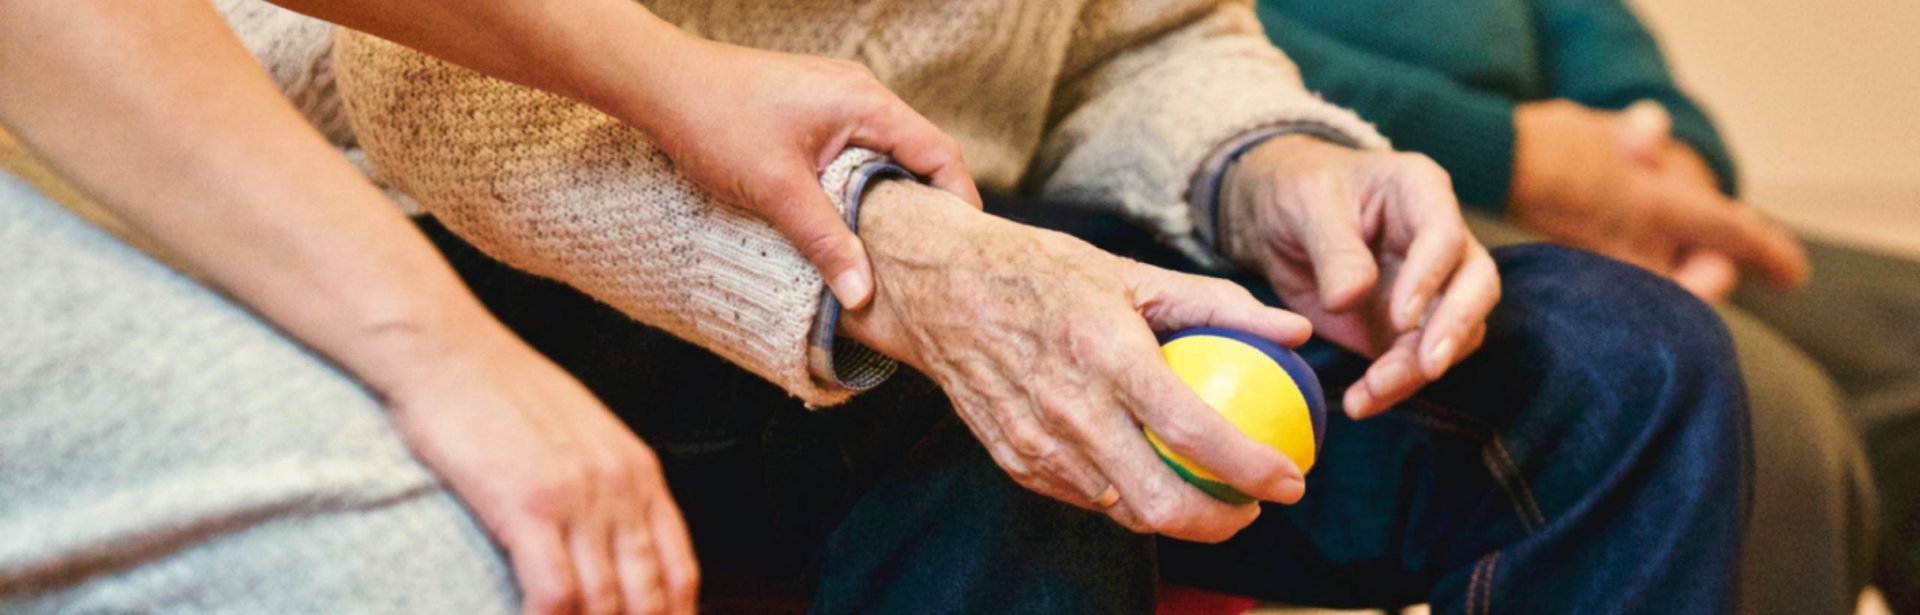 person holding elderly persons hand with a ball in it.